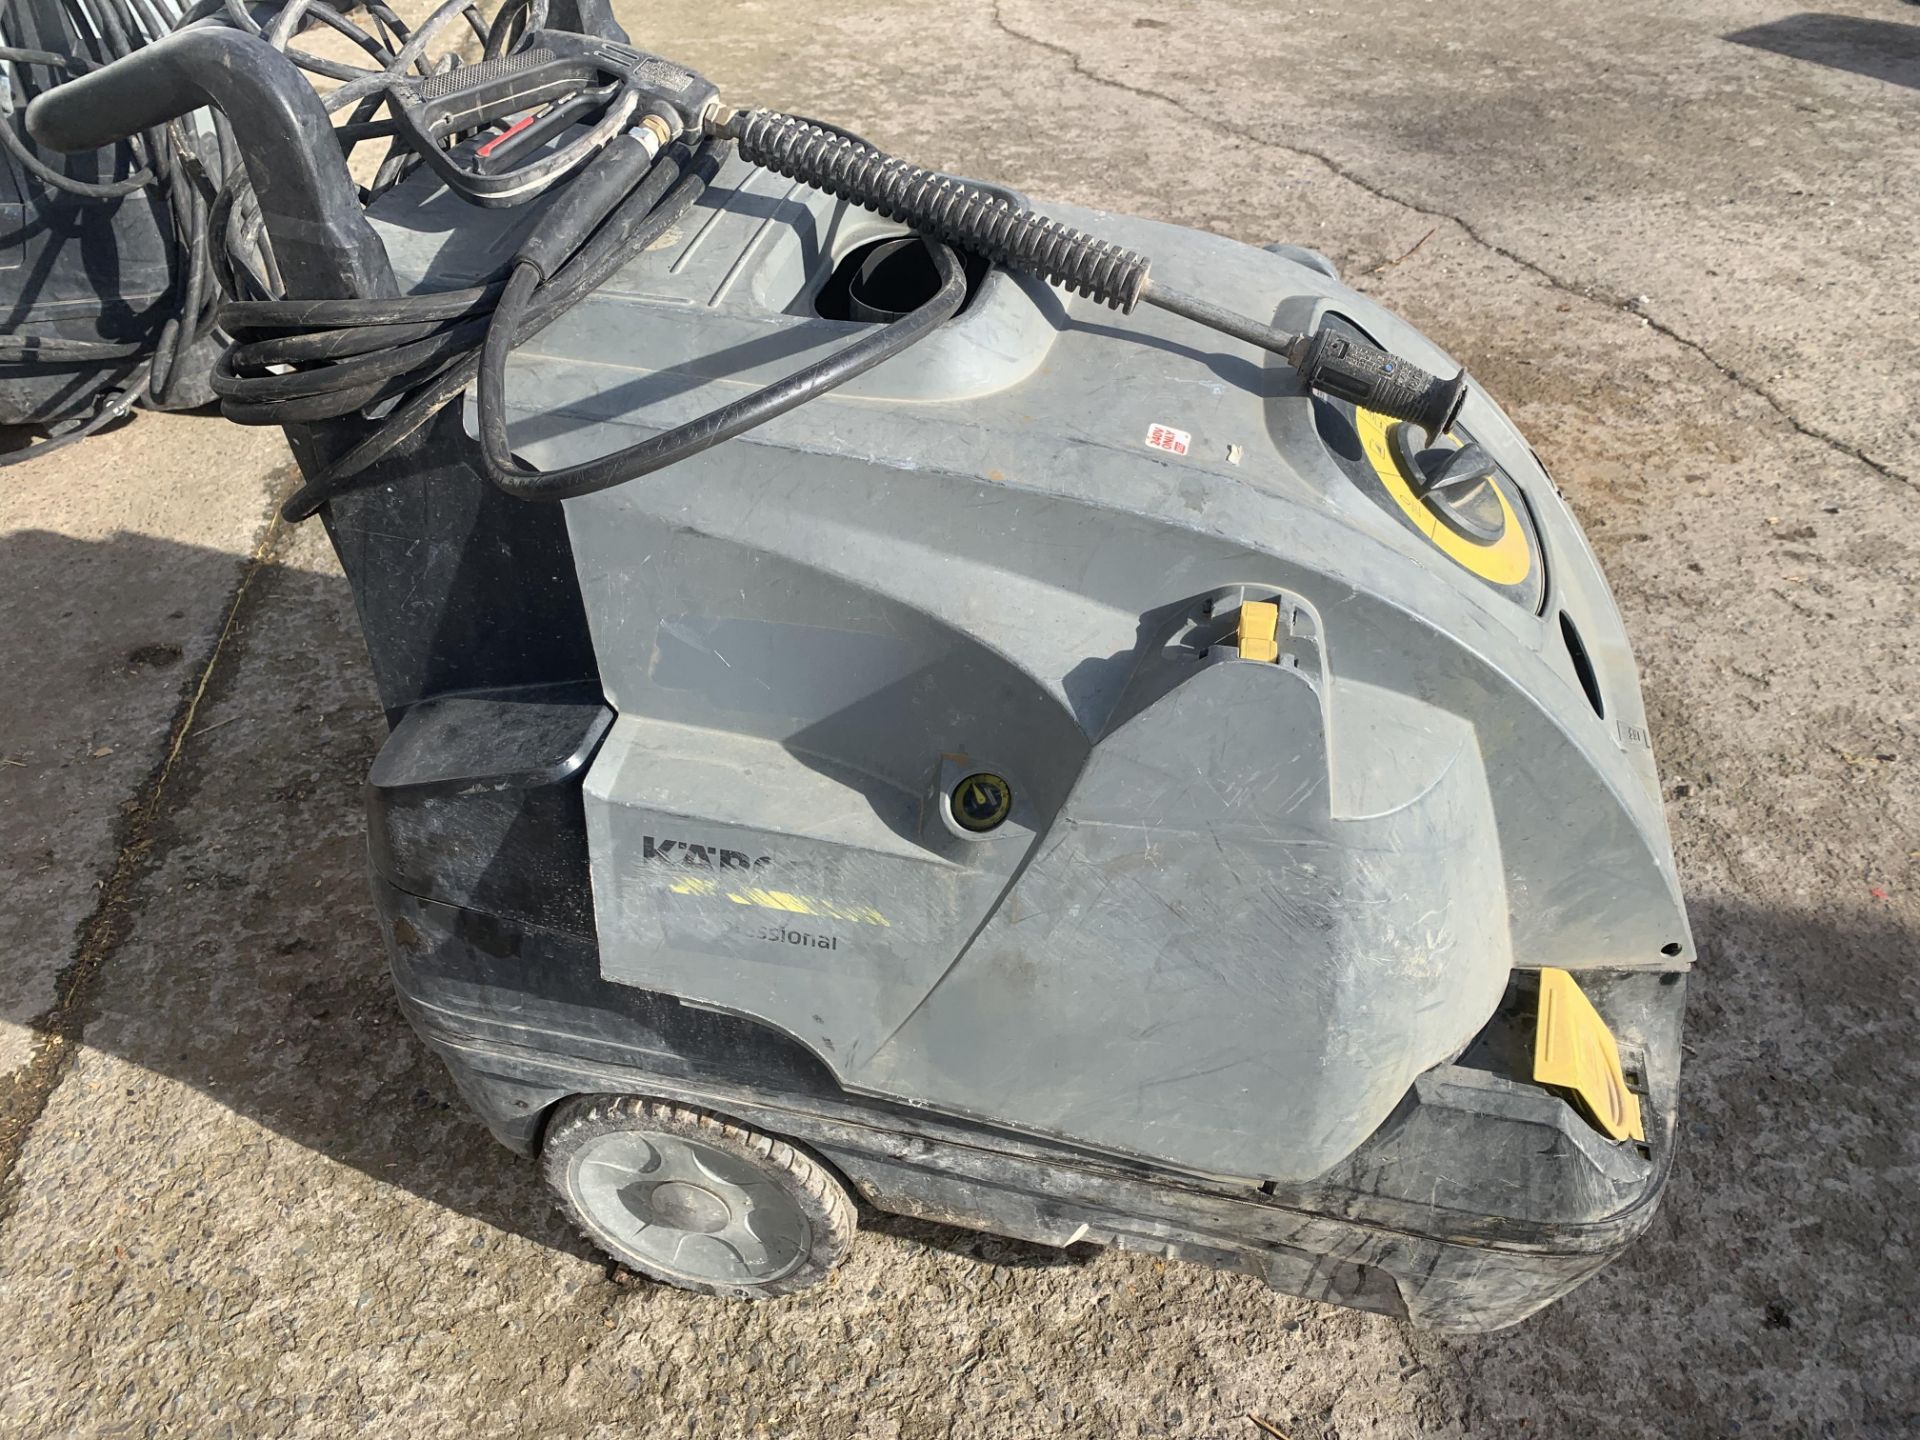 KARCHER DIESEL HOT AND COLD POWER WASHER LOCATION N IRELAND